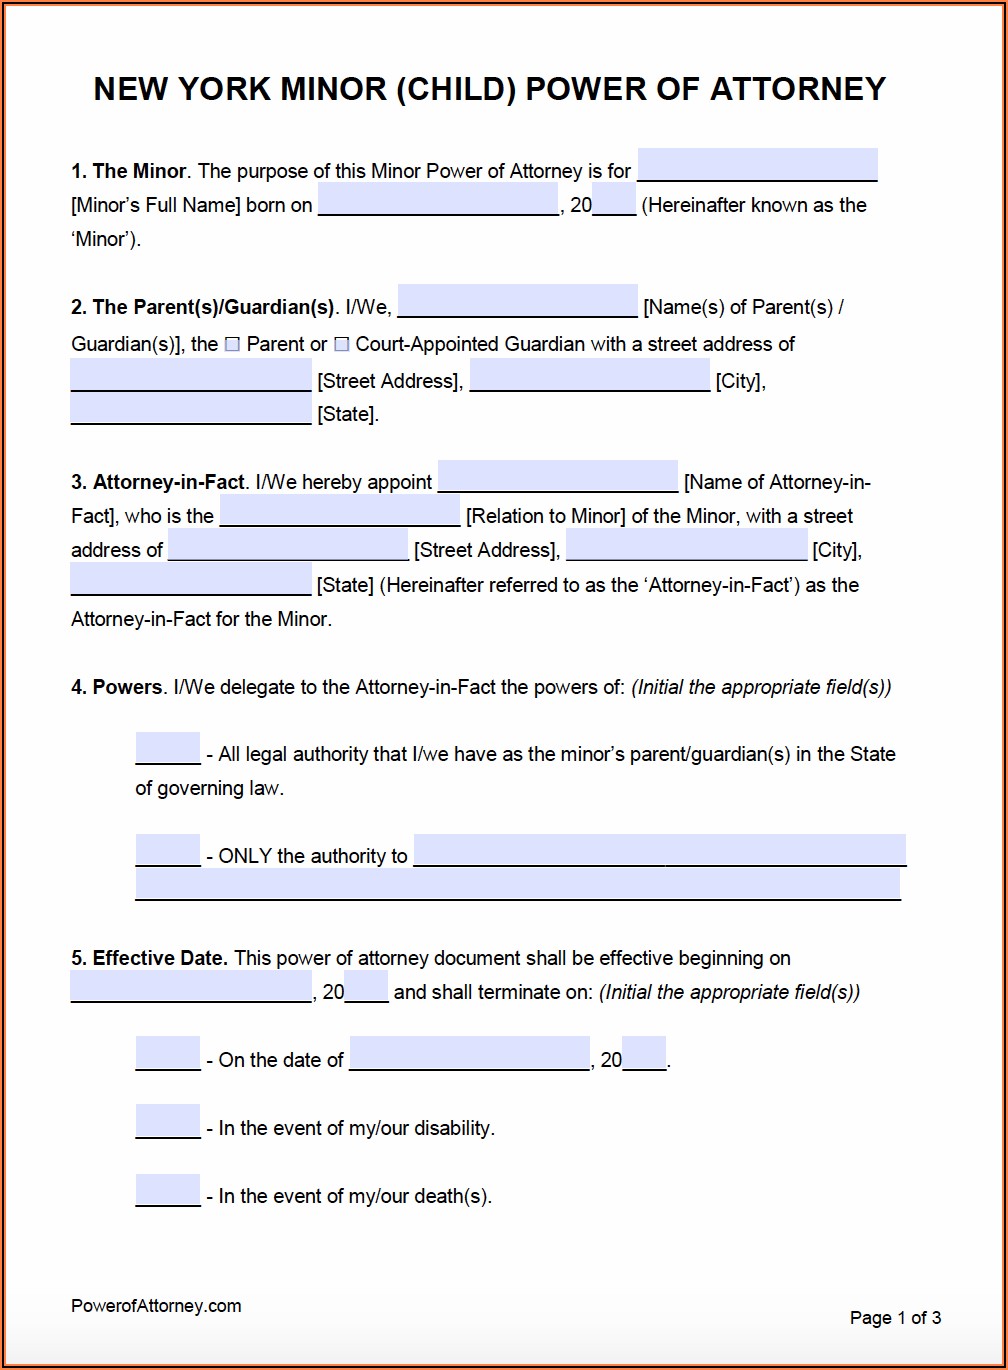 Nys Power Of Attorney Form 2018 Pdf